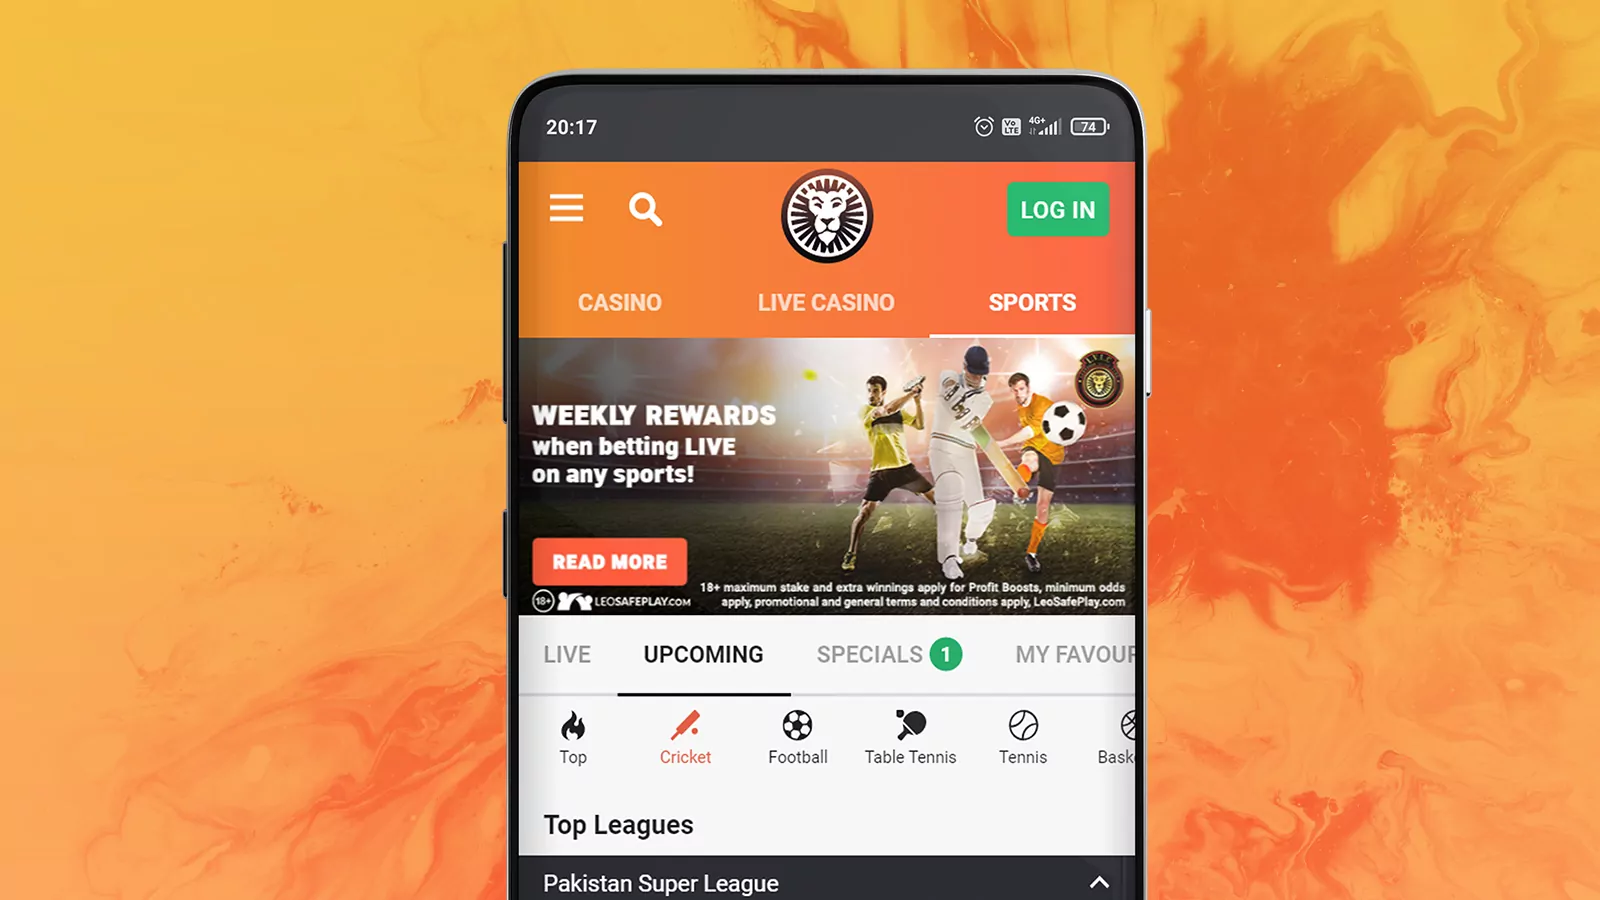 Check out this app and start betting on cricket there.